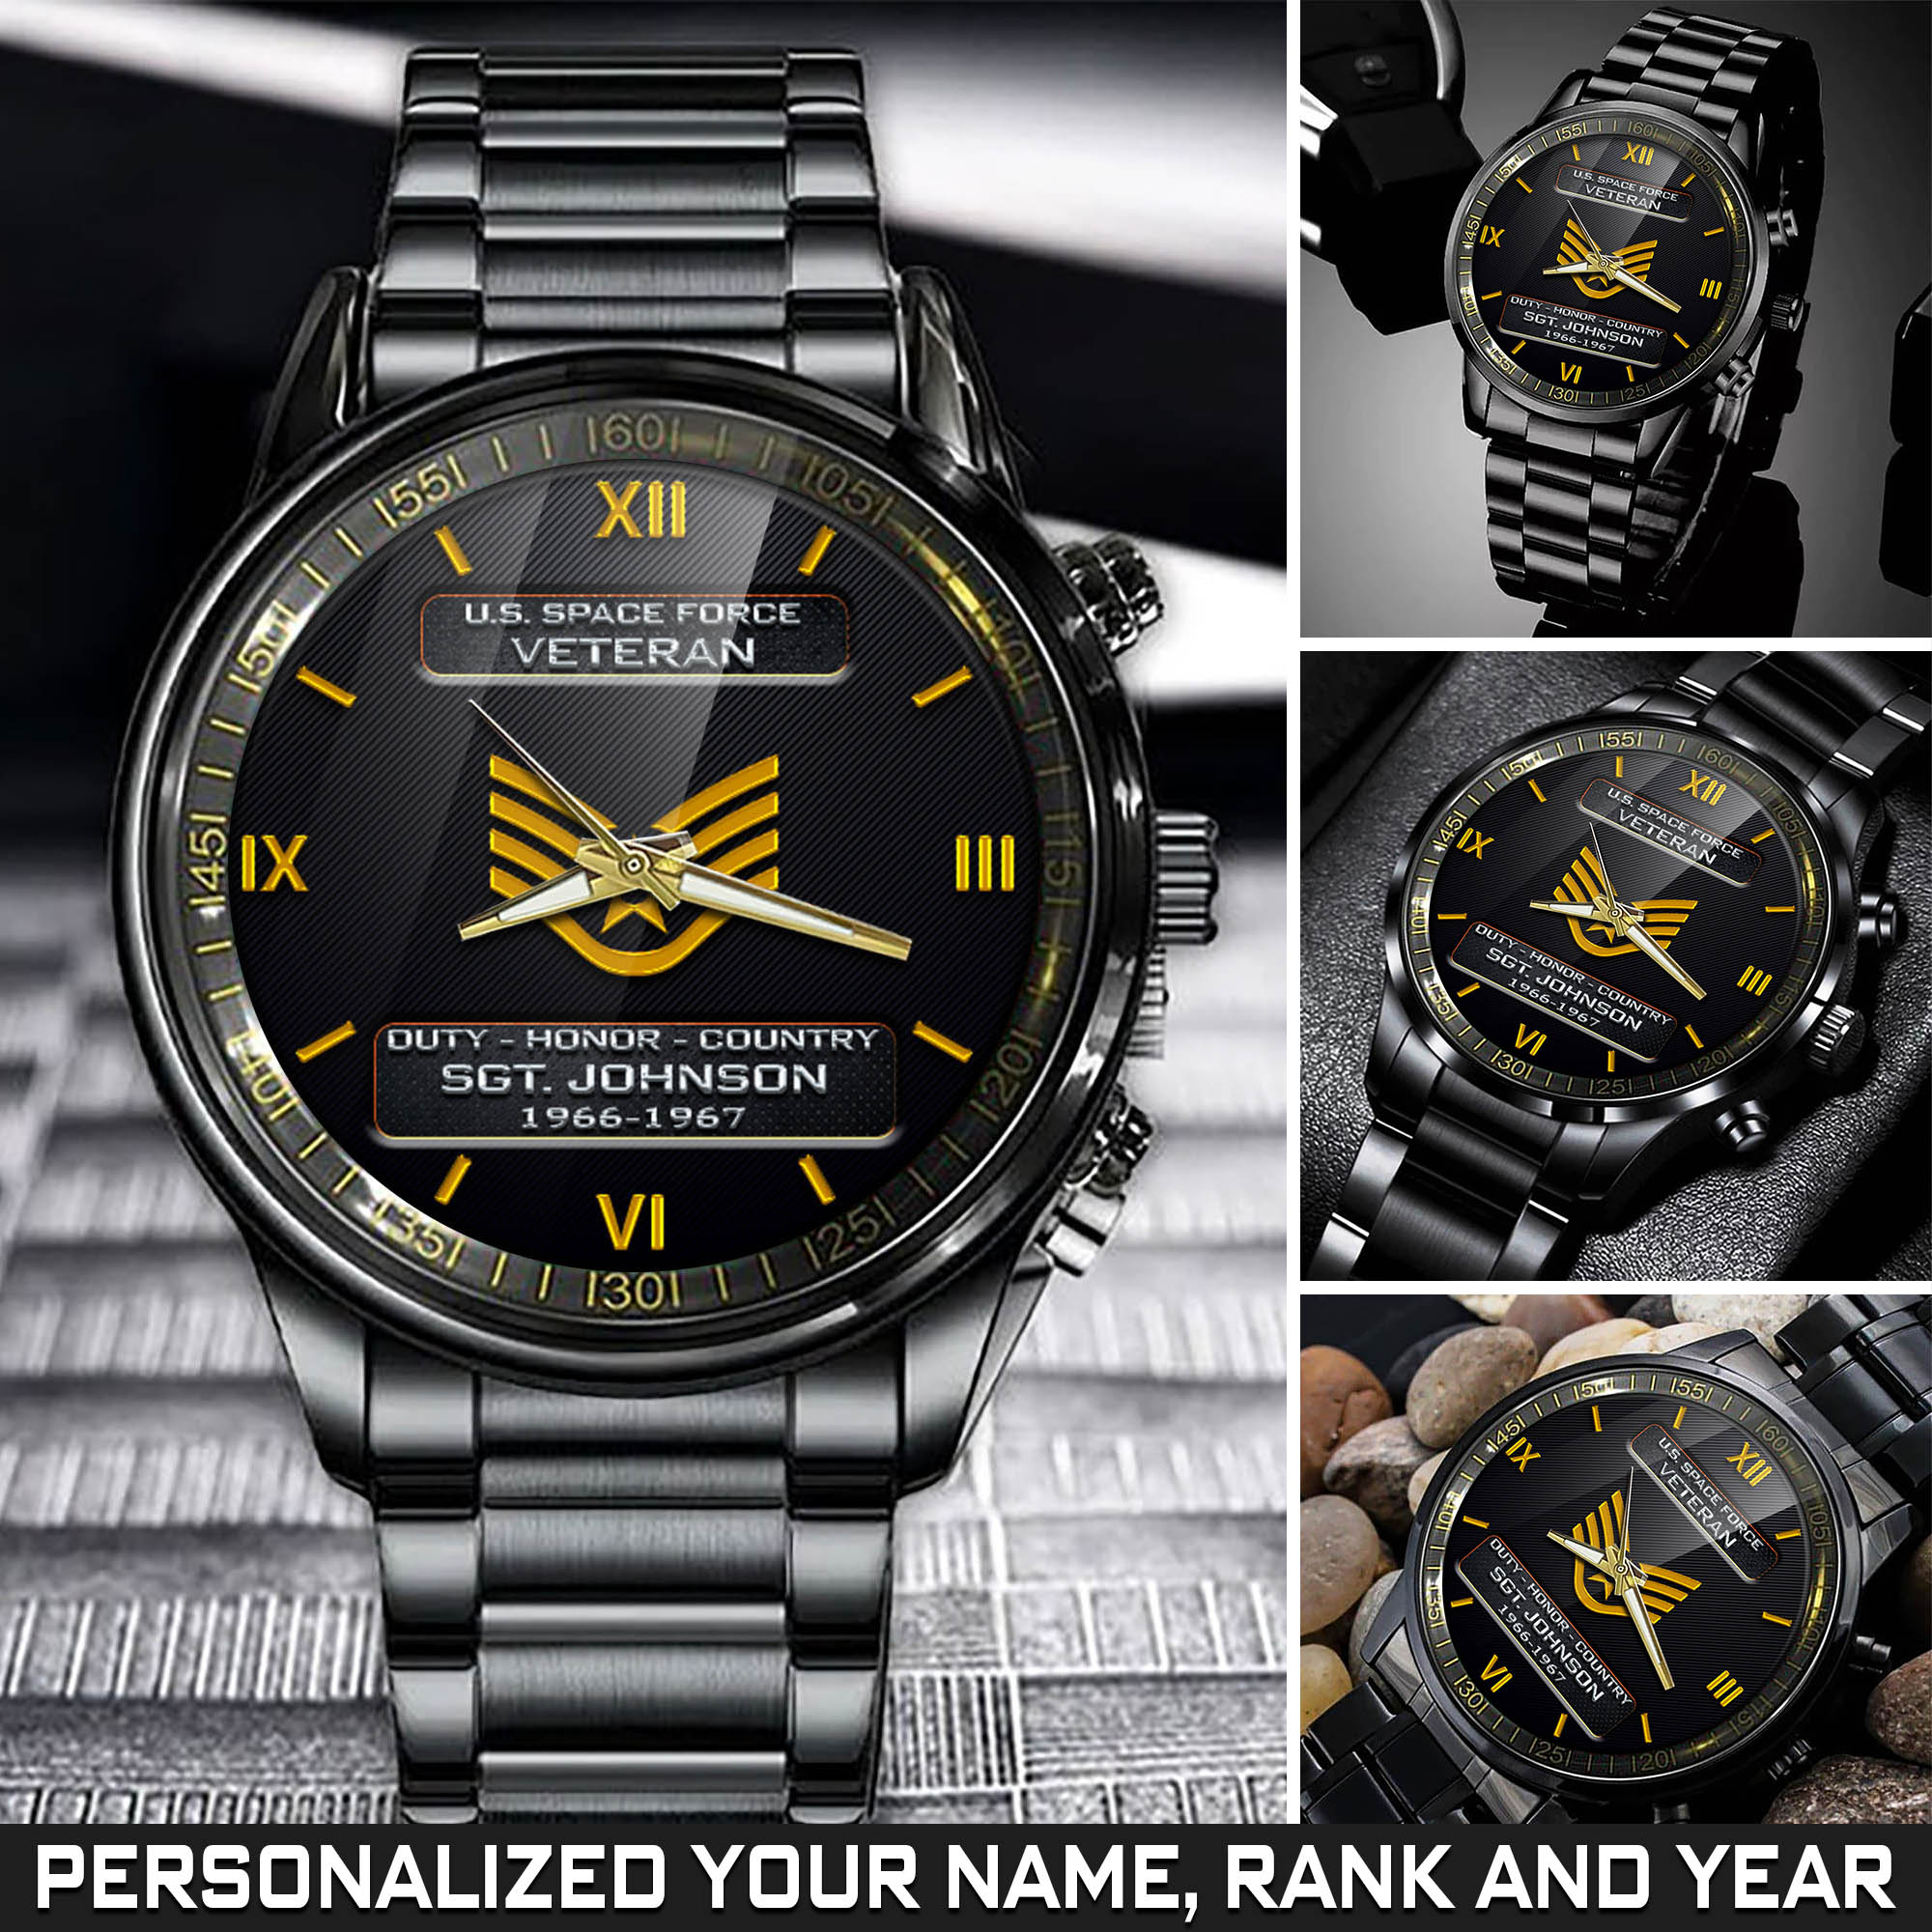 Personalized U.S. Space Force Veteran Black Fashion Watch With Your Name, Year And Rank, Military Watch For Veterans, Gift For Veterans ETHY-57684